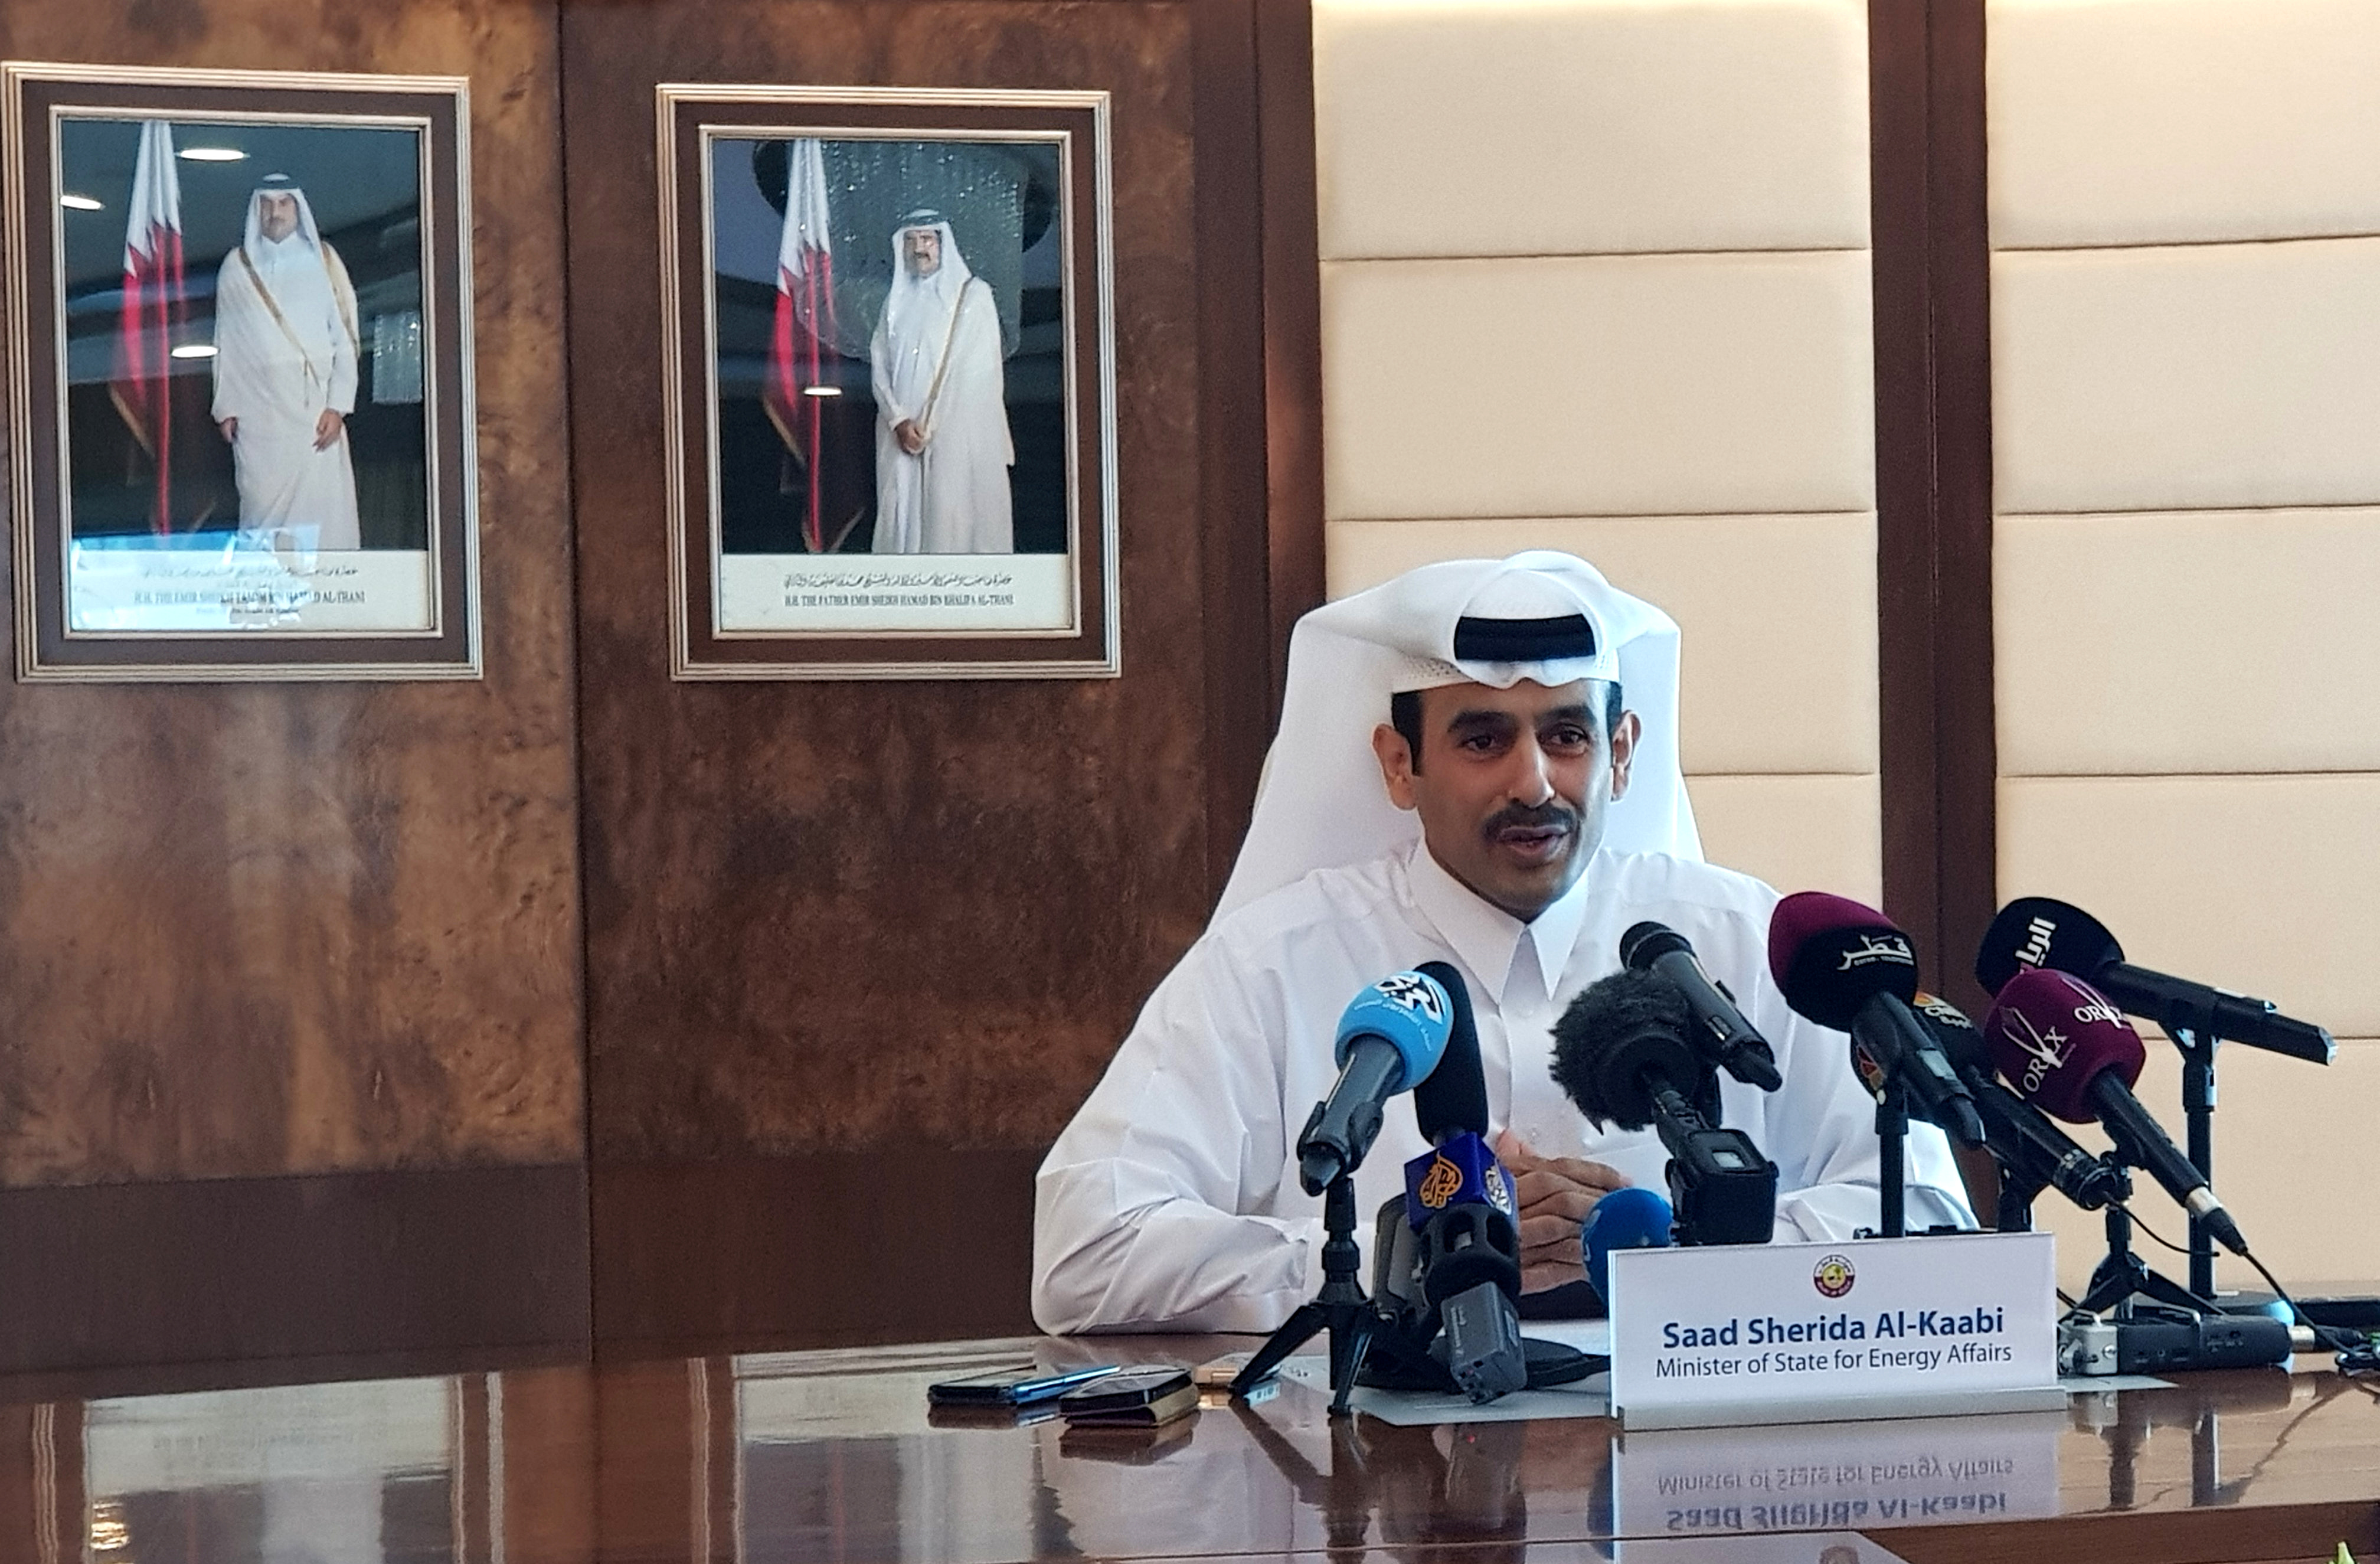 Saad al-Kaabi, Minister of State for Energy Affairs, speaks during a news conference in Doha